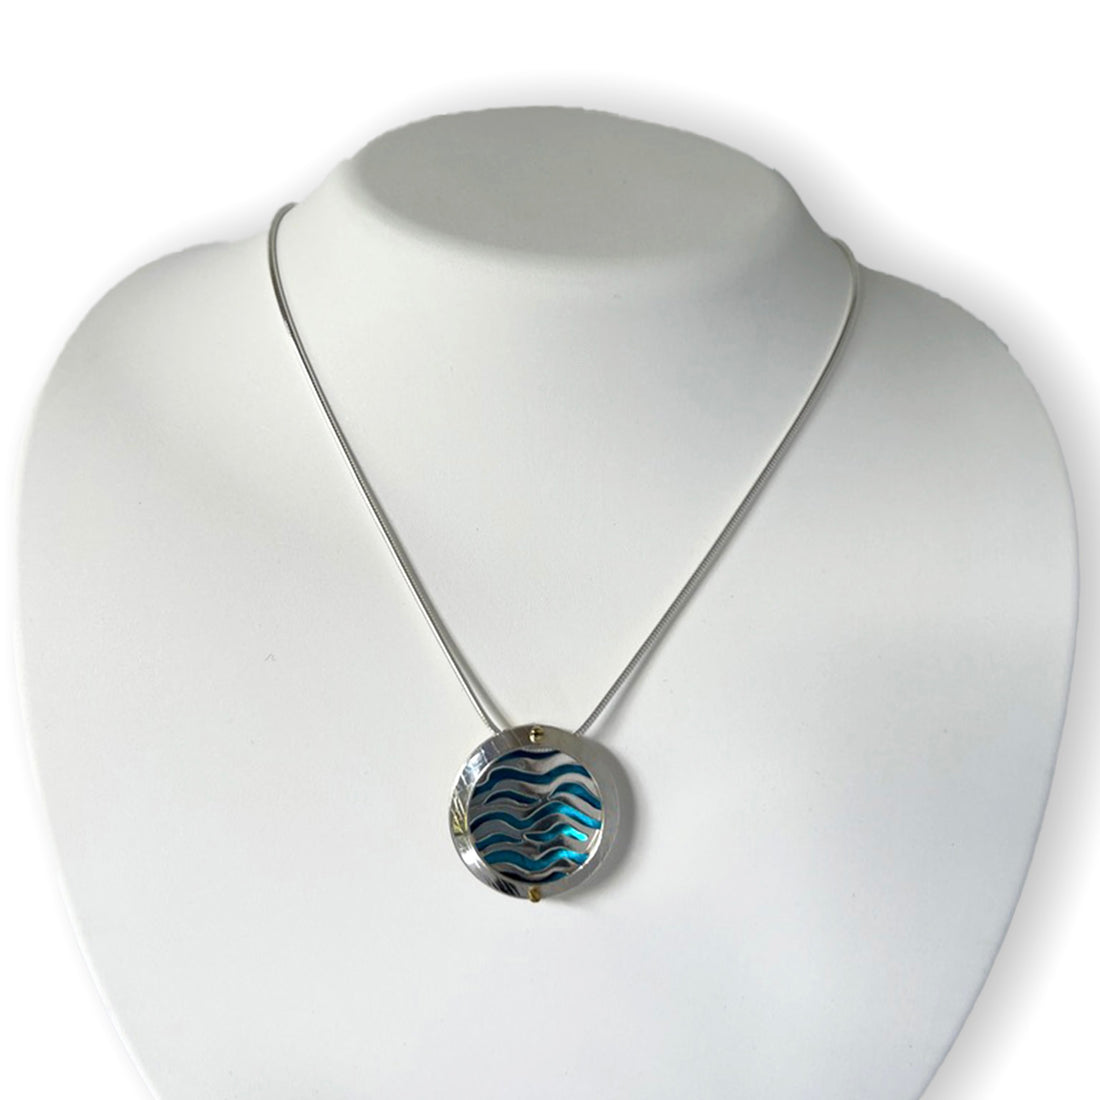 Waves-Silver and Niobium Necklace